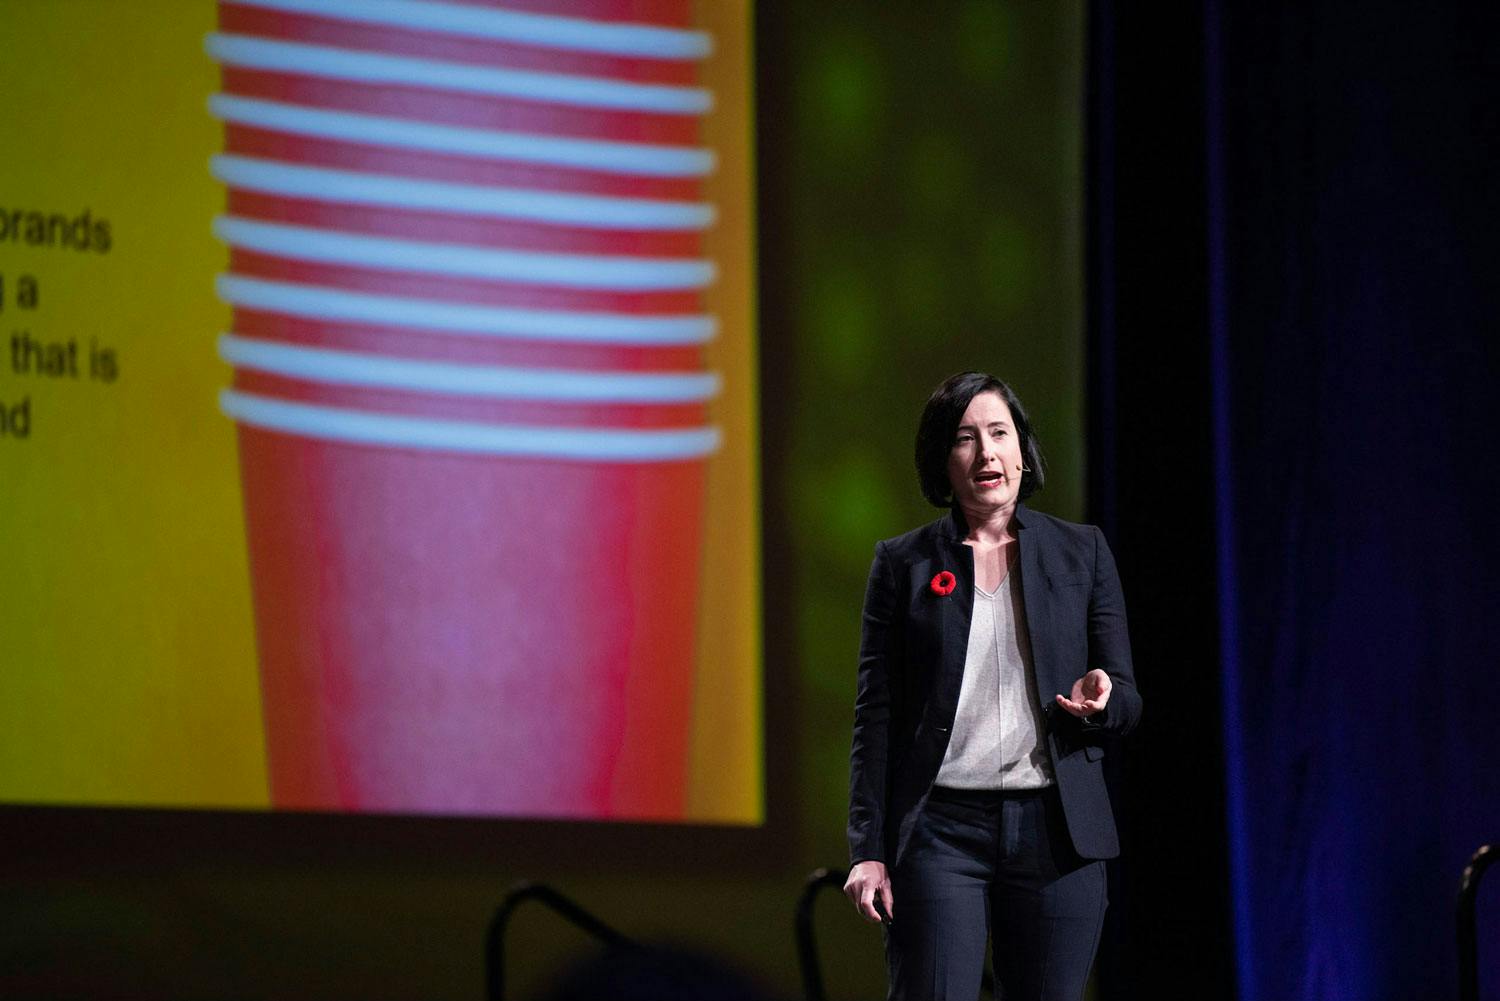 Kate Daly, a white-skinned woman with short black hair speaks on stage. On screen behind her is a stack of red plastic cups.